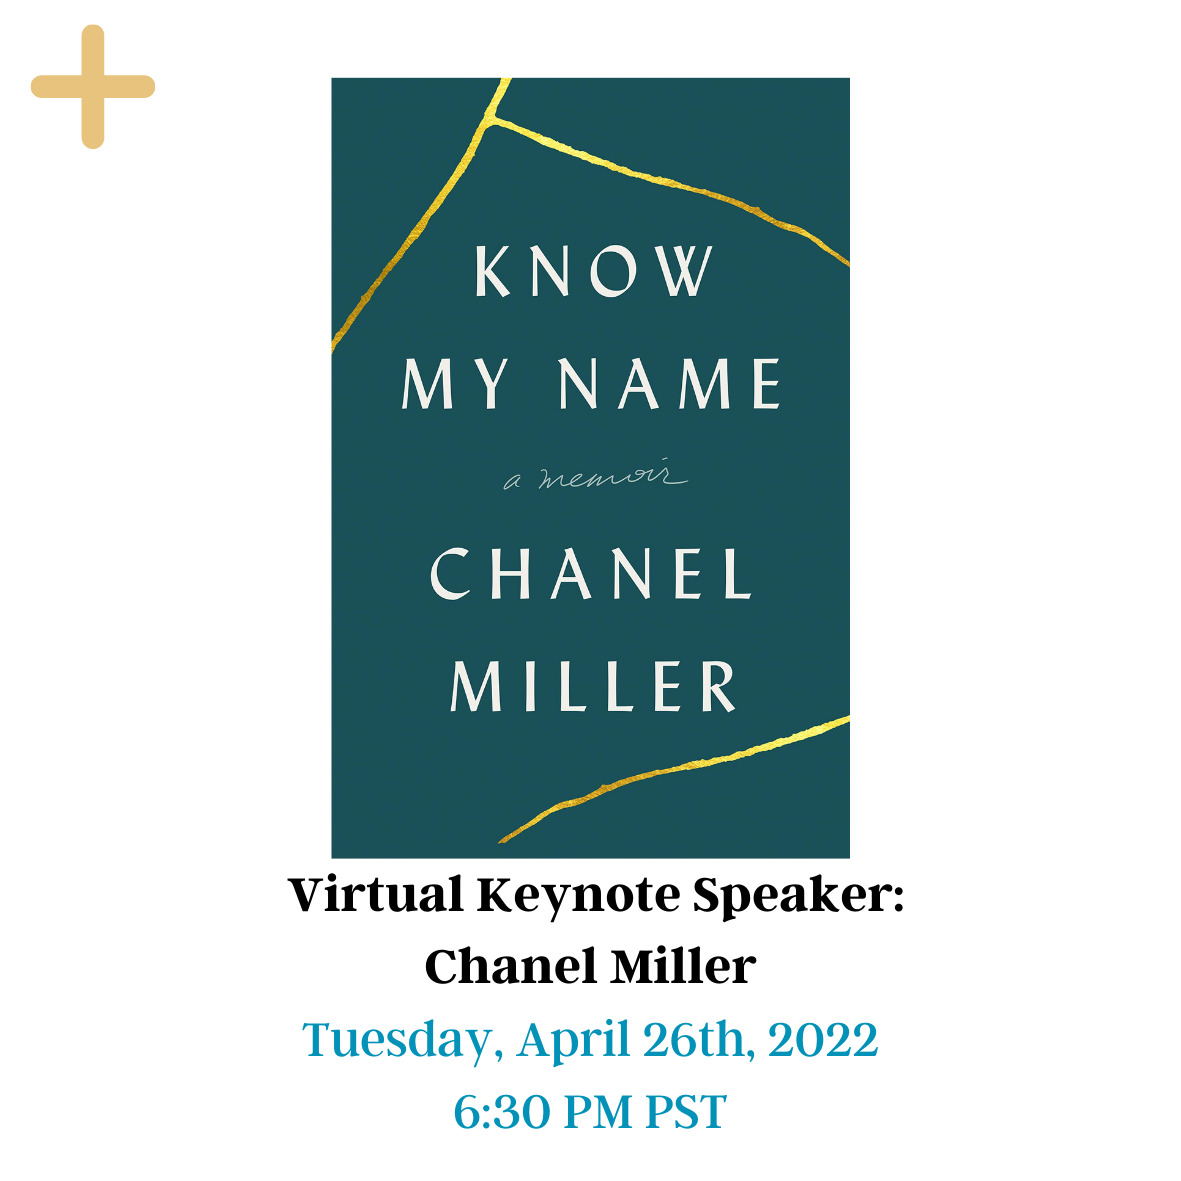 Virtual Keynote Speaker: Chanel Miller author of Know My Name cover page with the cover of the book displayed. The book cover has a teal background with 3 gold cracks and KNOW MY NAME a memoir CHANEL MILLER written. The yellow button on the top can be clicked and will provide more information. The picture has a date at the bottom: Tuesday, April 26th, 2022, 6:30 PM